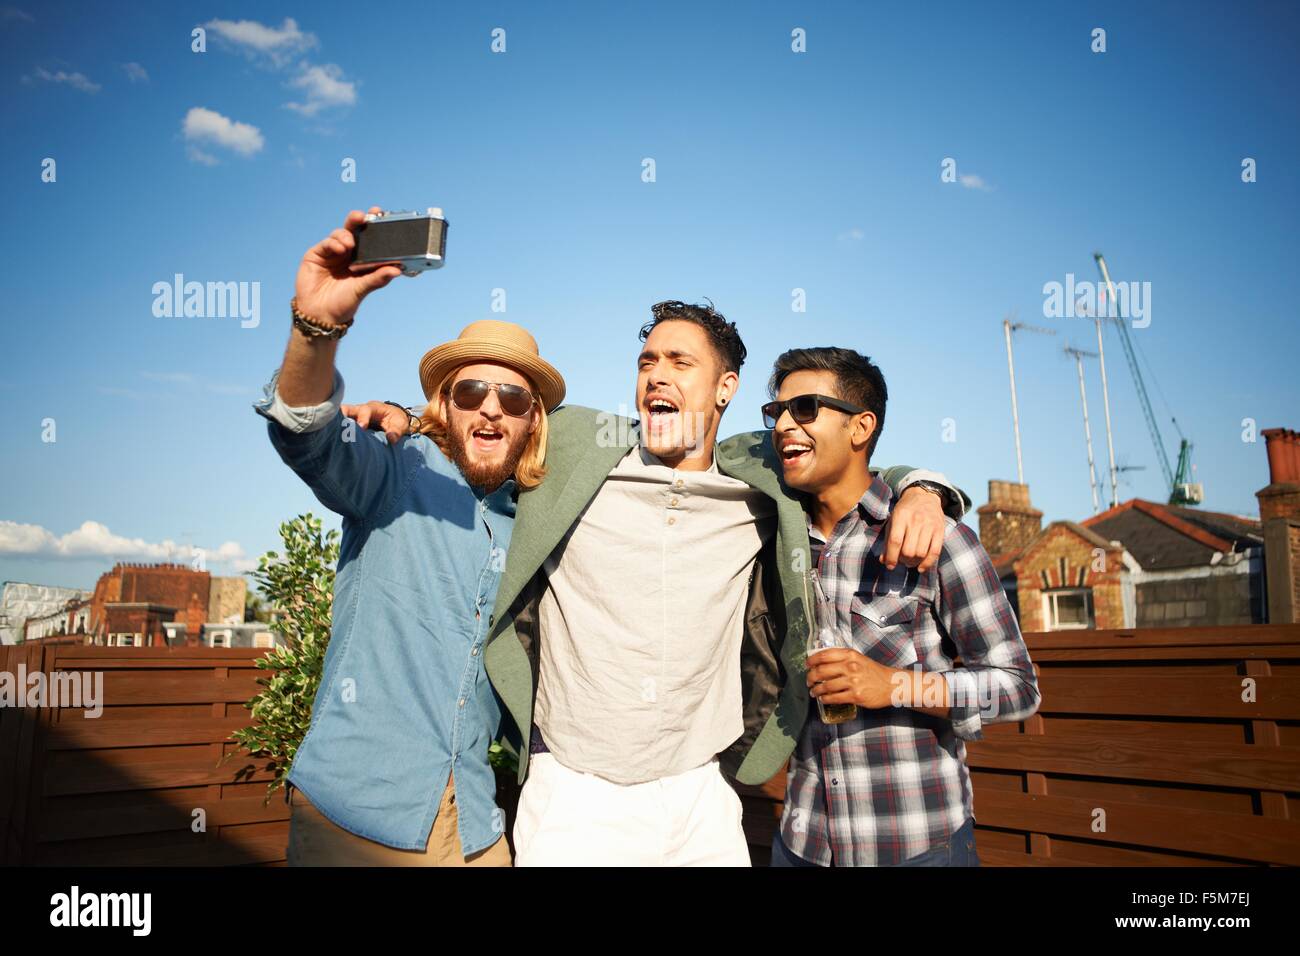 Three male friends taking camera selfie at rooftop party Stock Photo